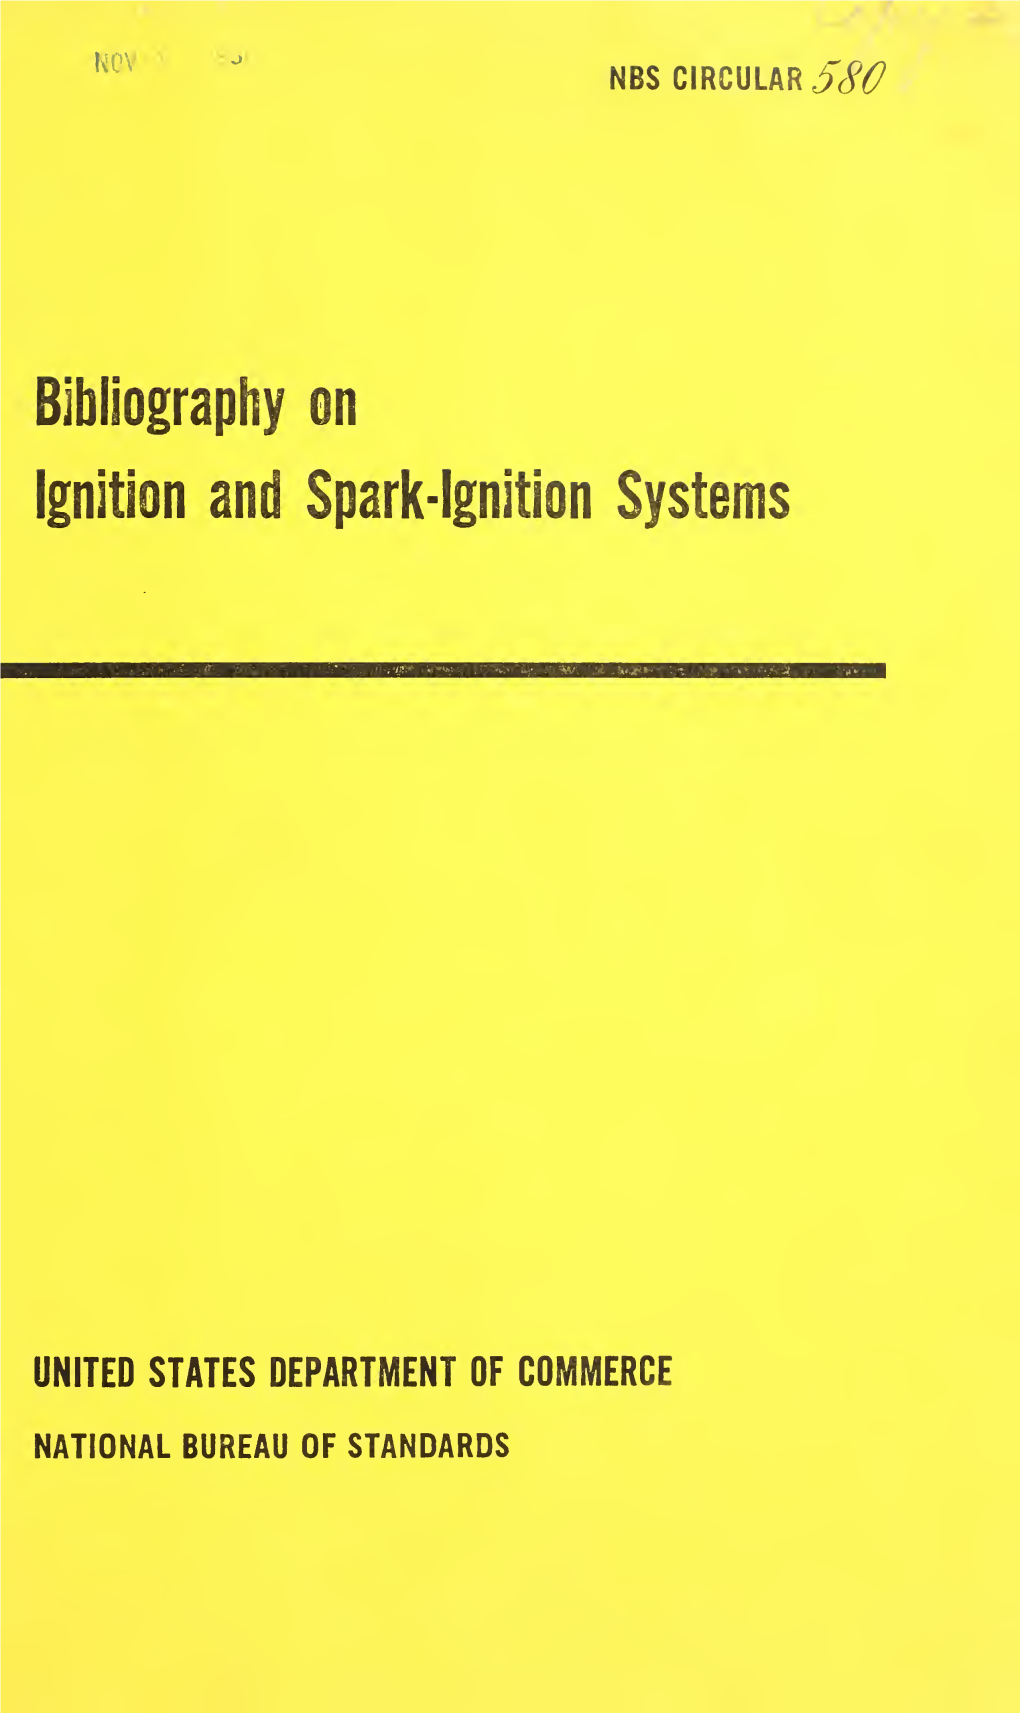 Bibliography on Ignition and Spark-Ignition Systems